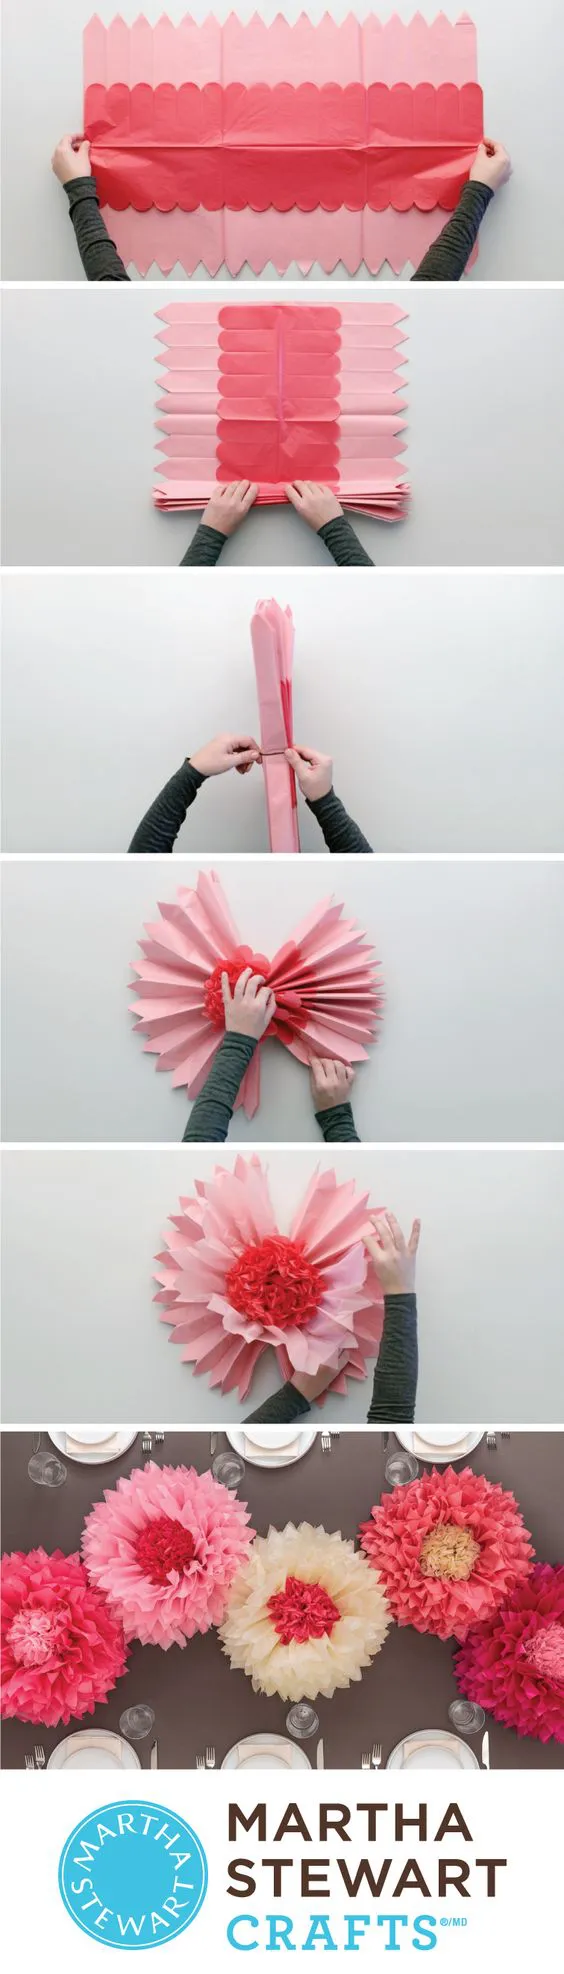 Beautiful floral pom poms. #decoration #pink #floral #spring #classroom #ideas #inspiration #board: 